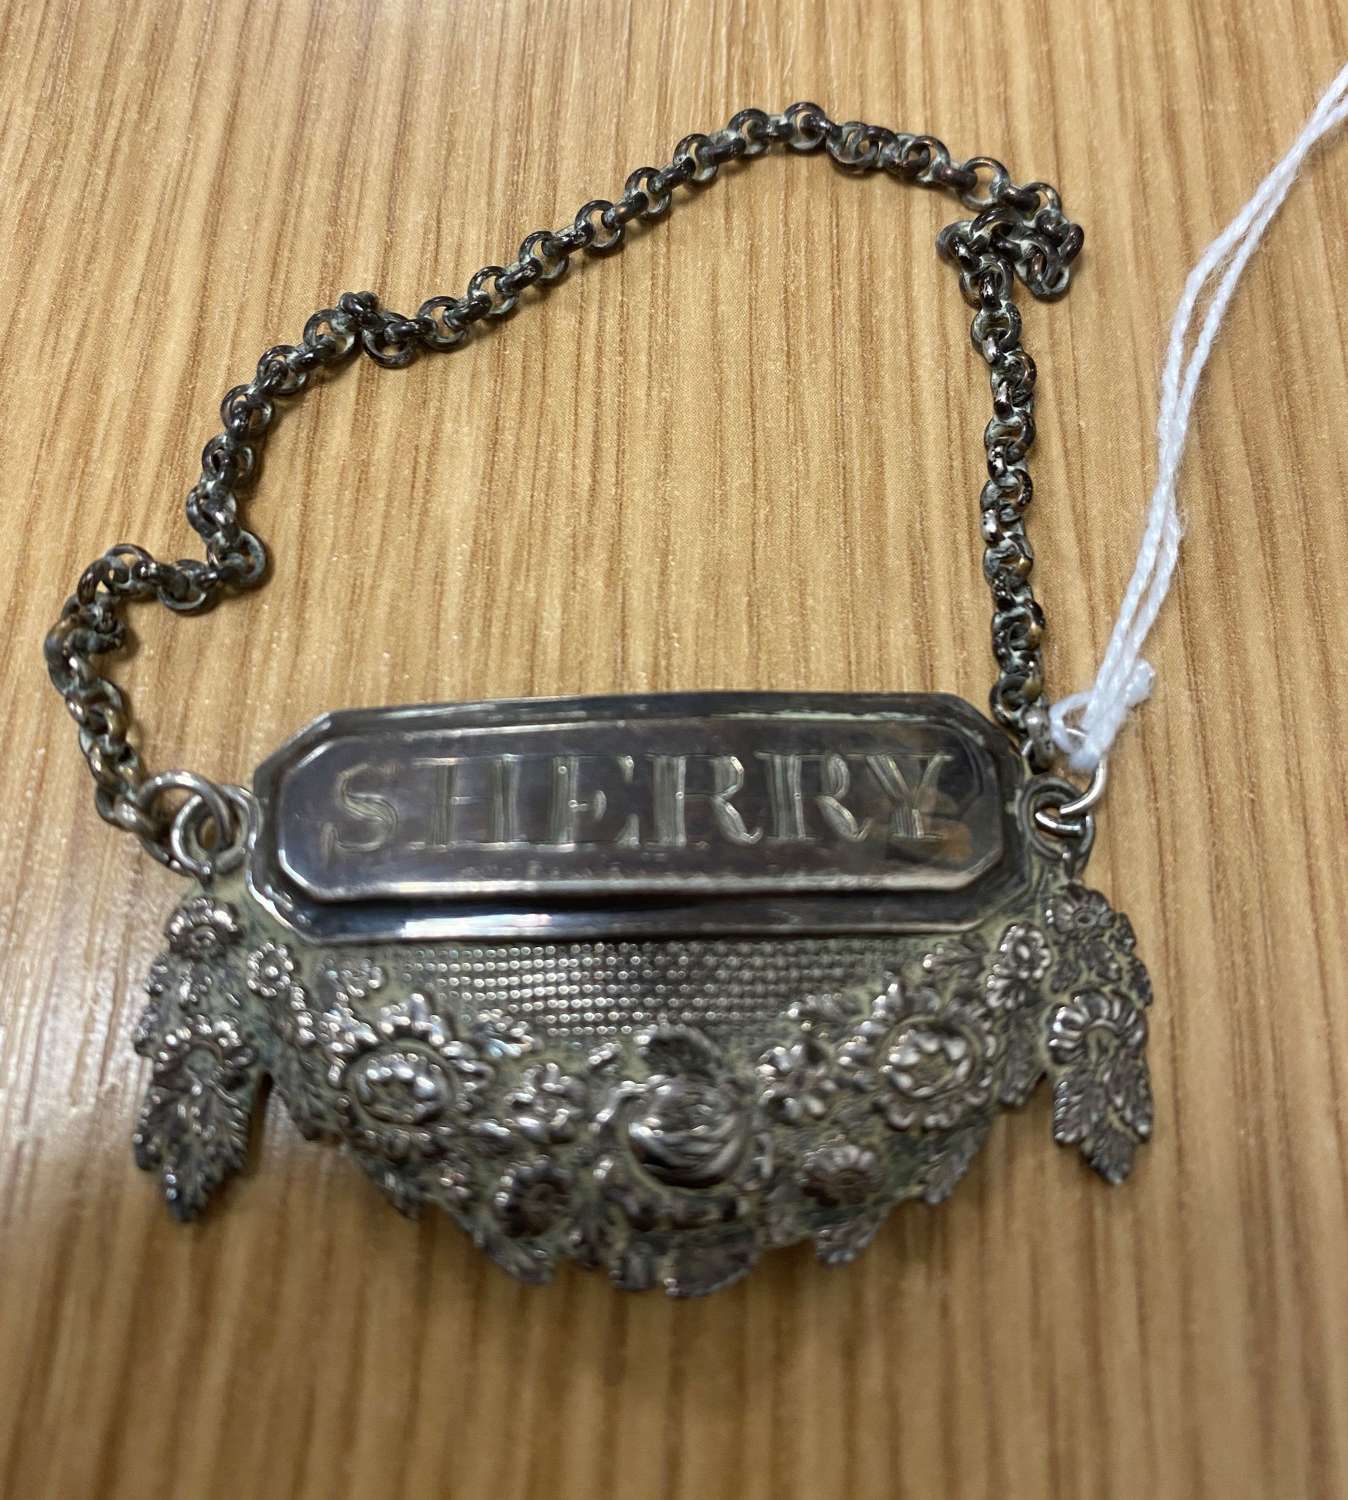 Antique Solid Silver Sherry Decanter Label